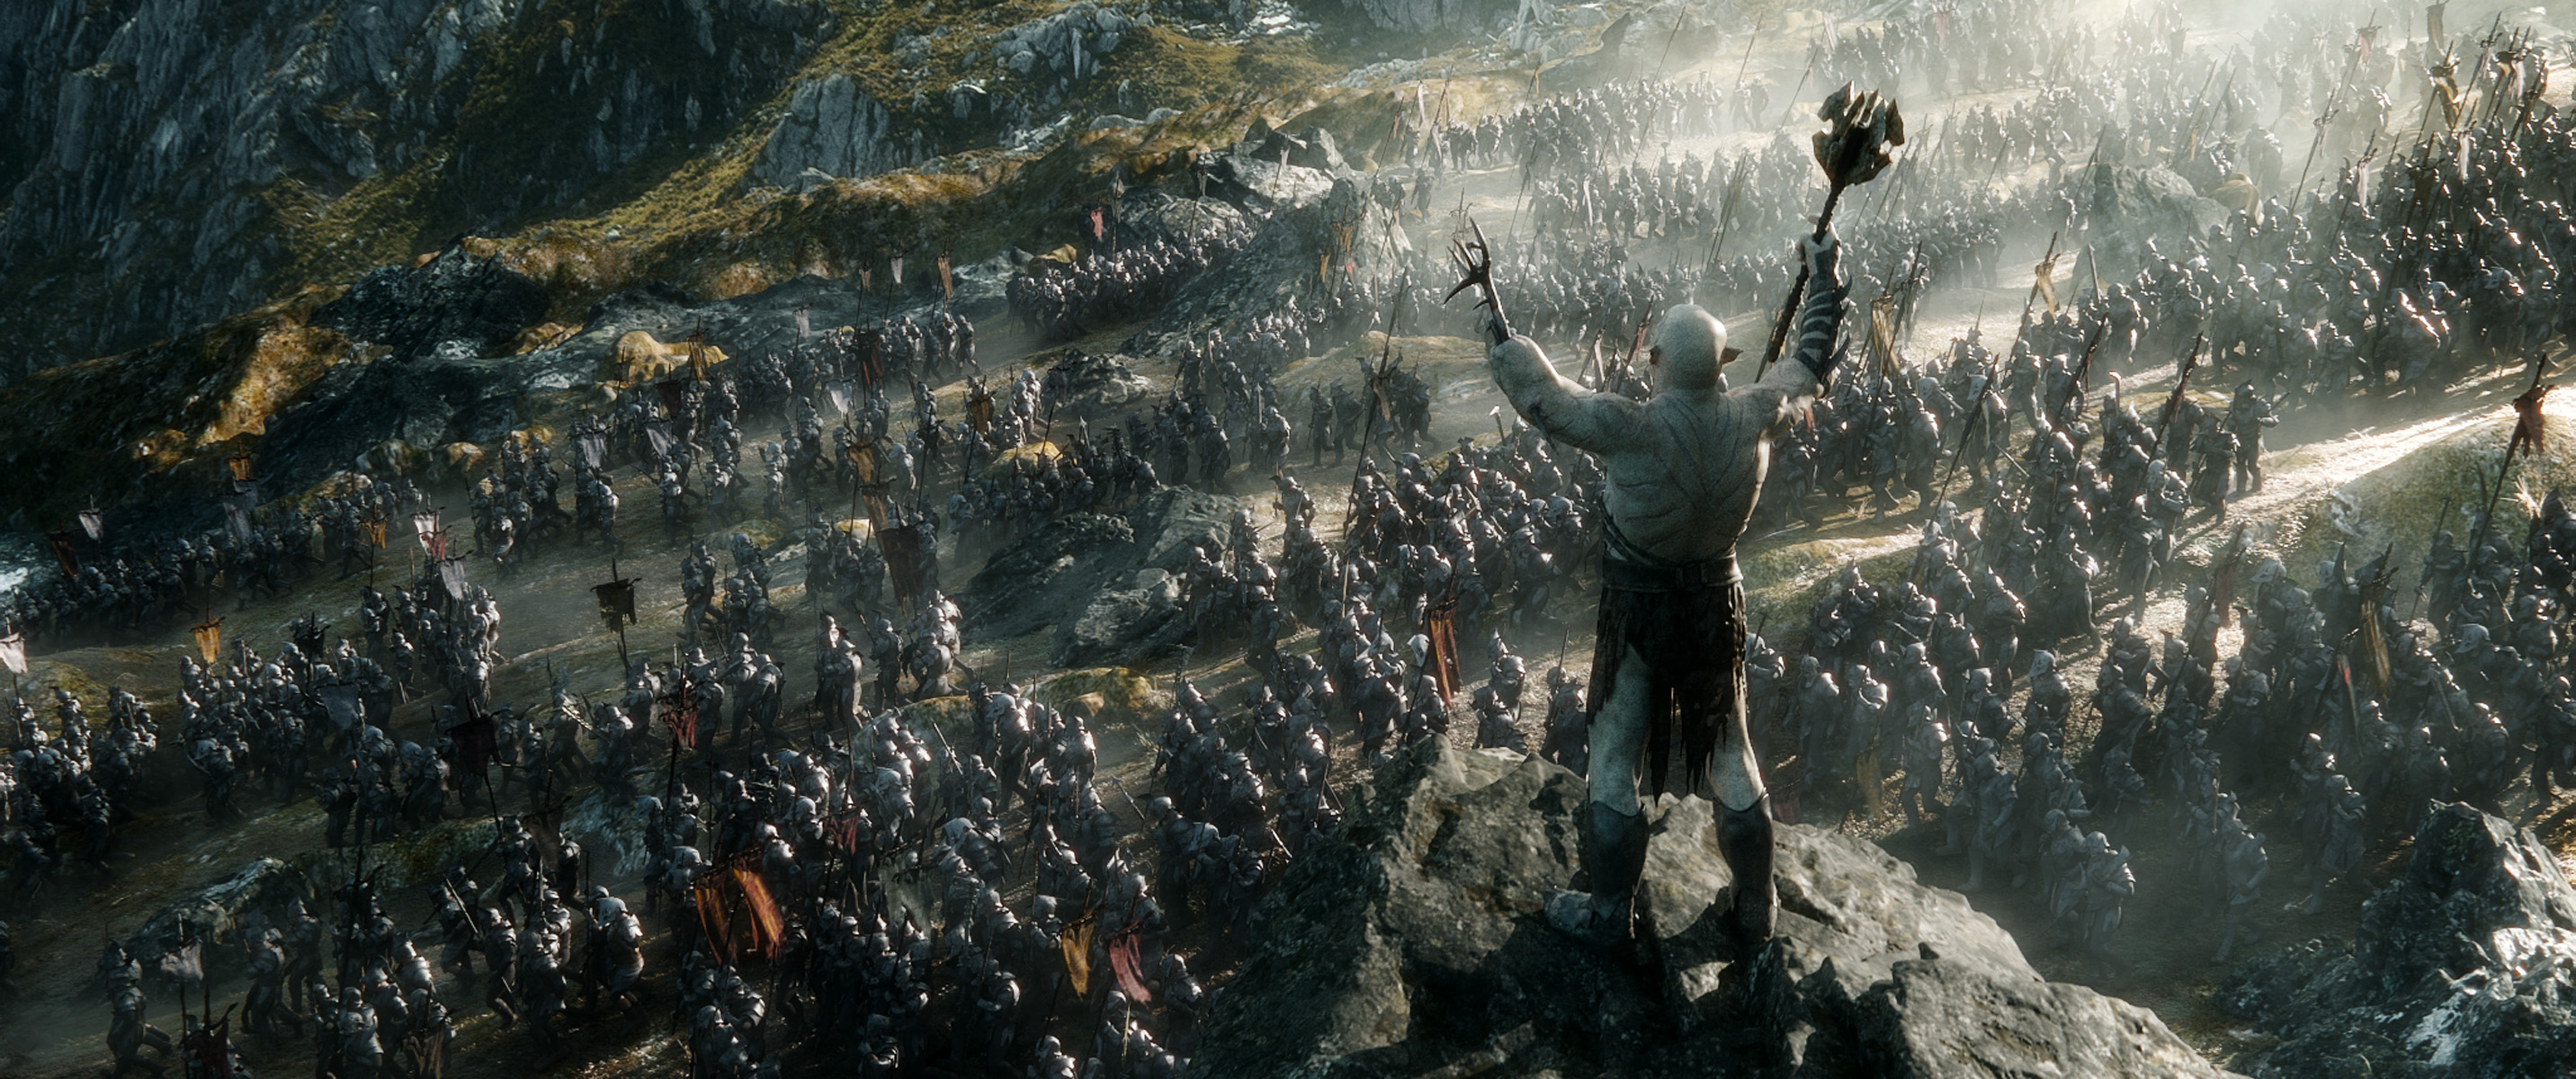 five-official-stills-from-the-hobbit-the-battle-of-the-five-armies